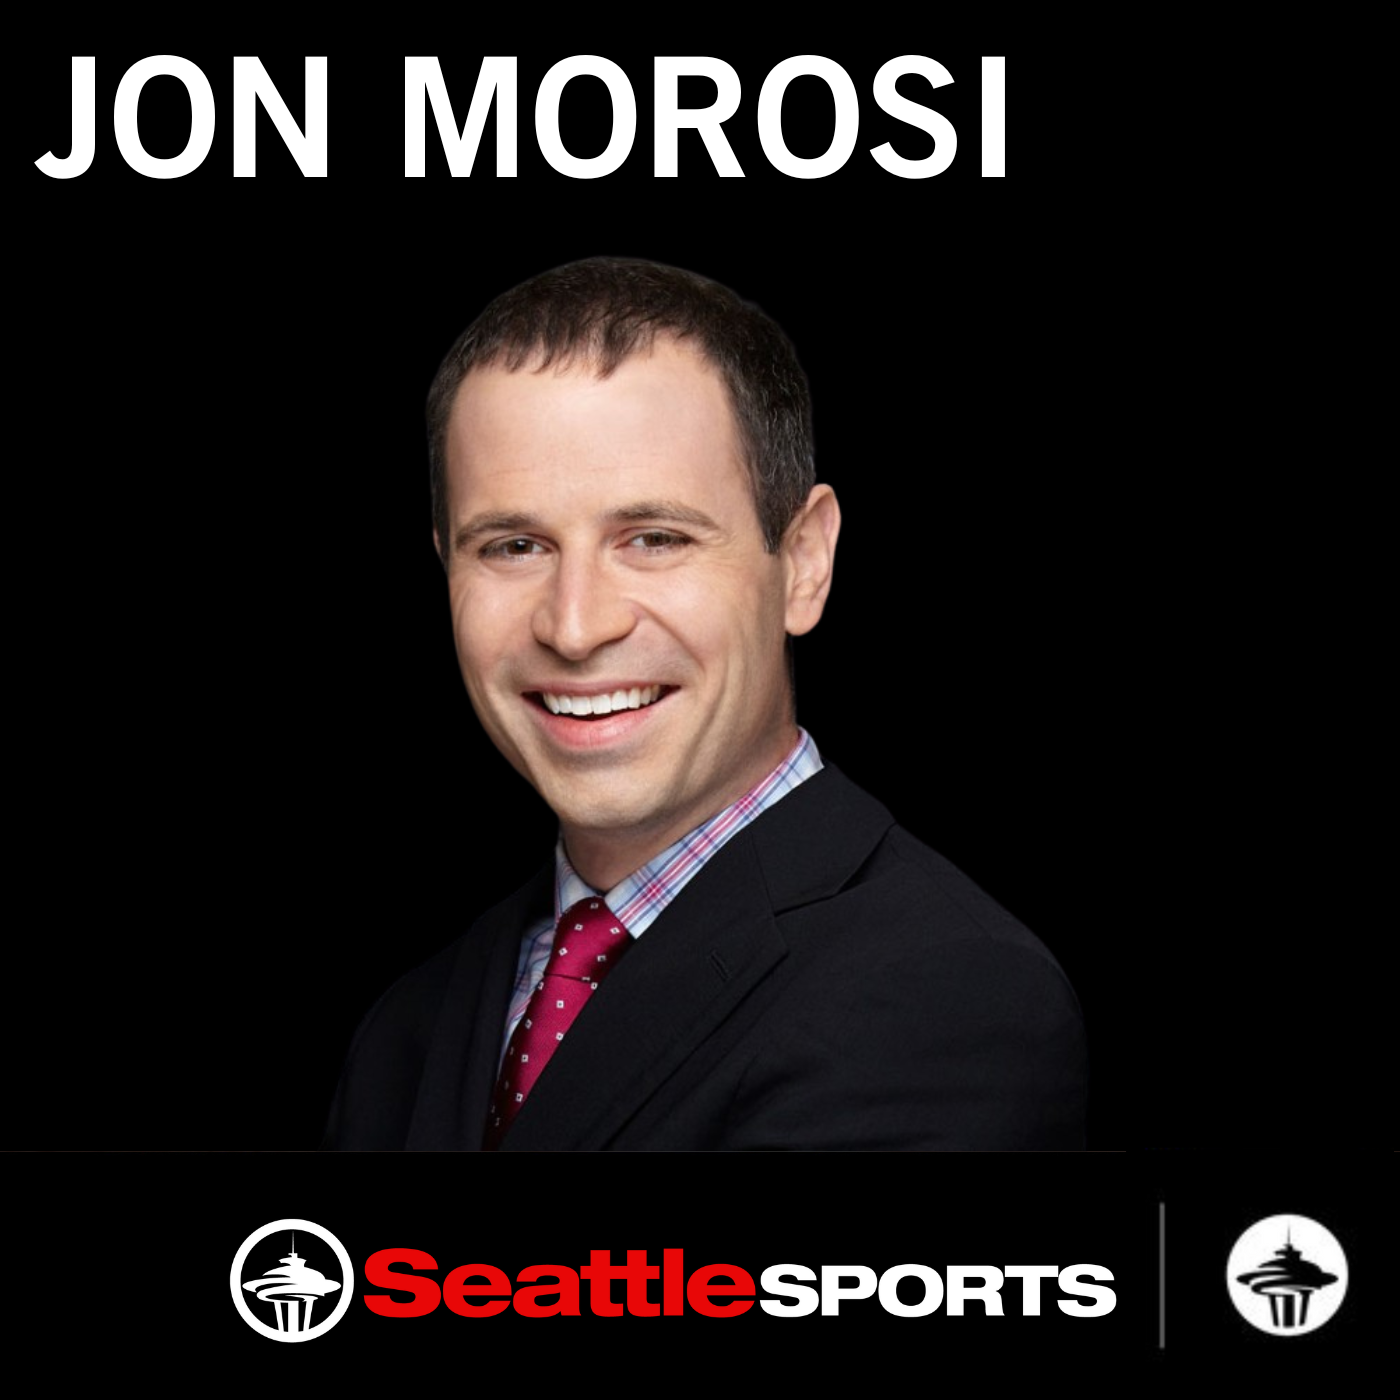 Jon Morosi on the moves the Mariners need to make to improve their offense